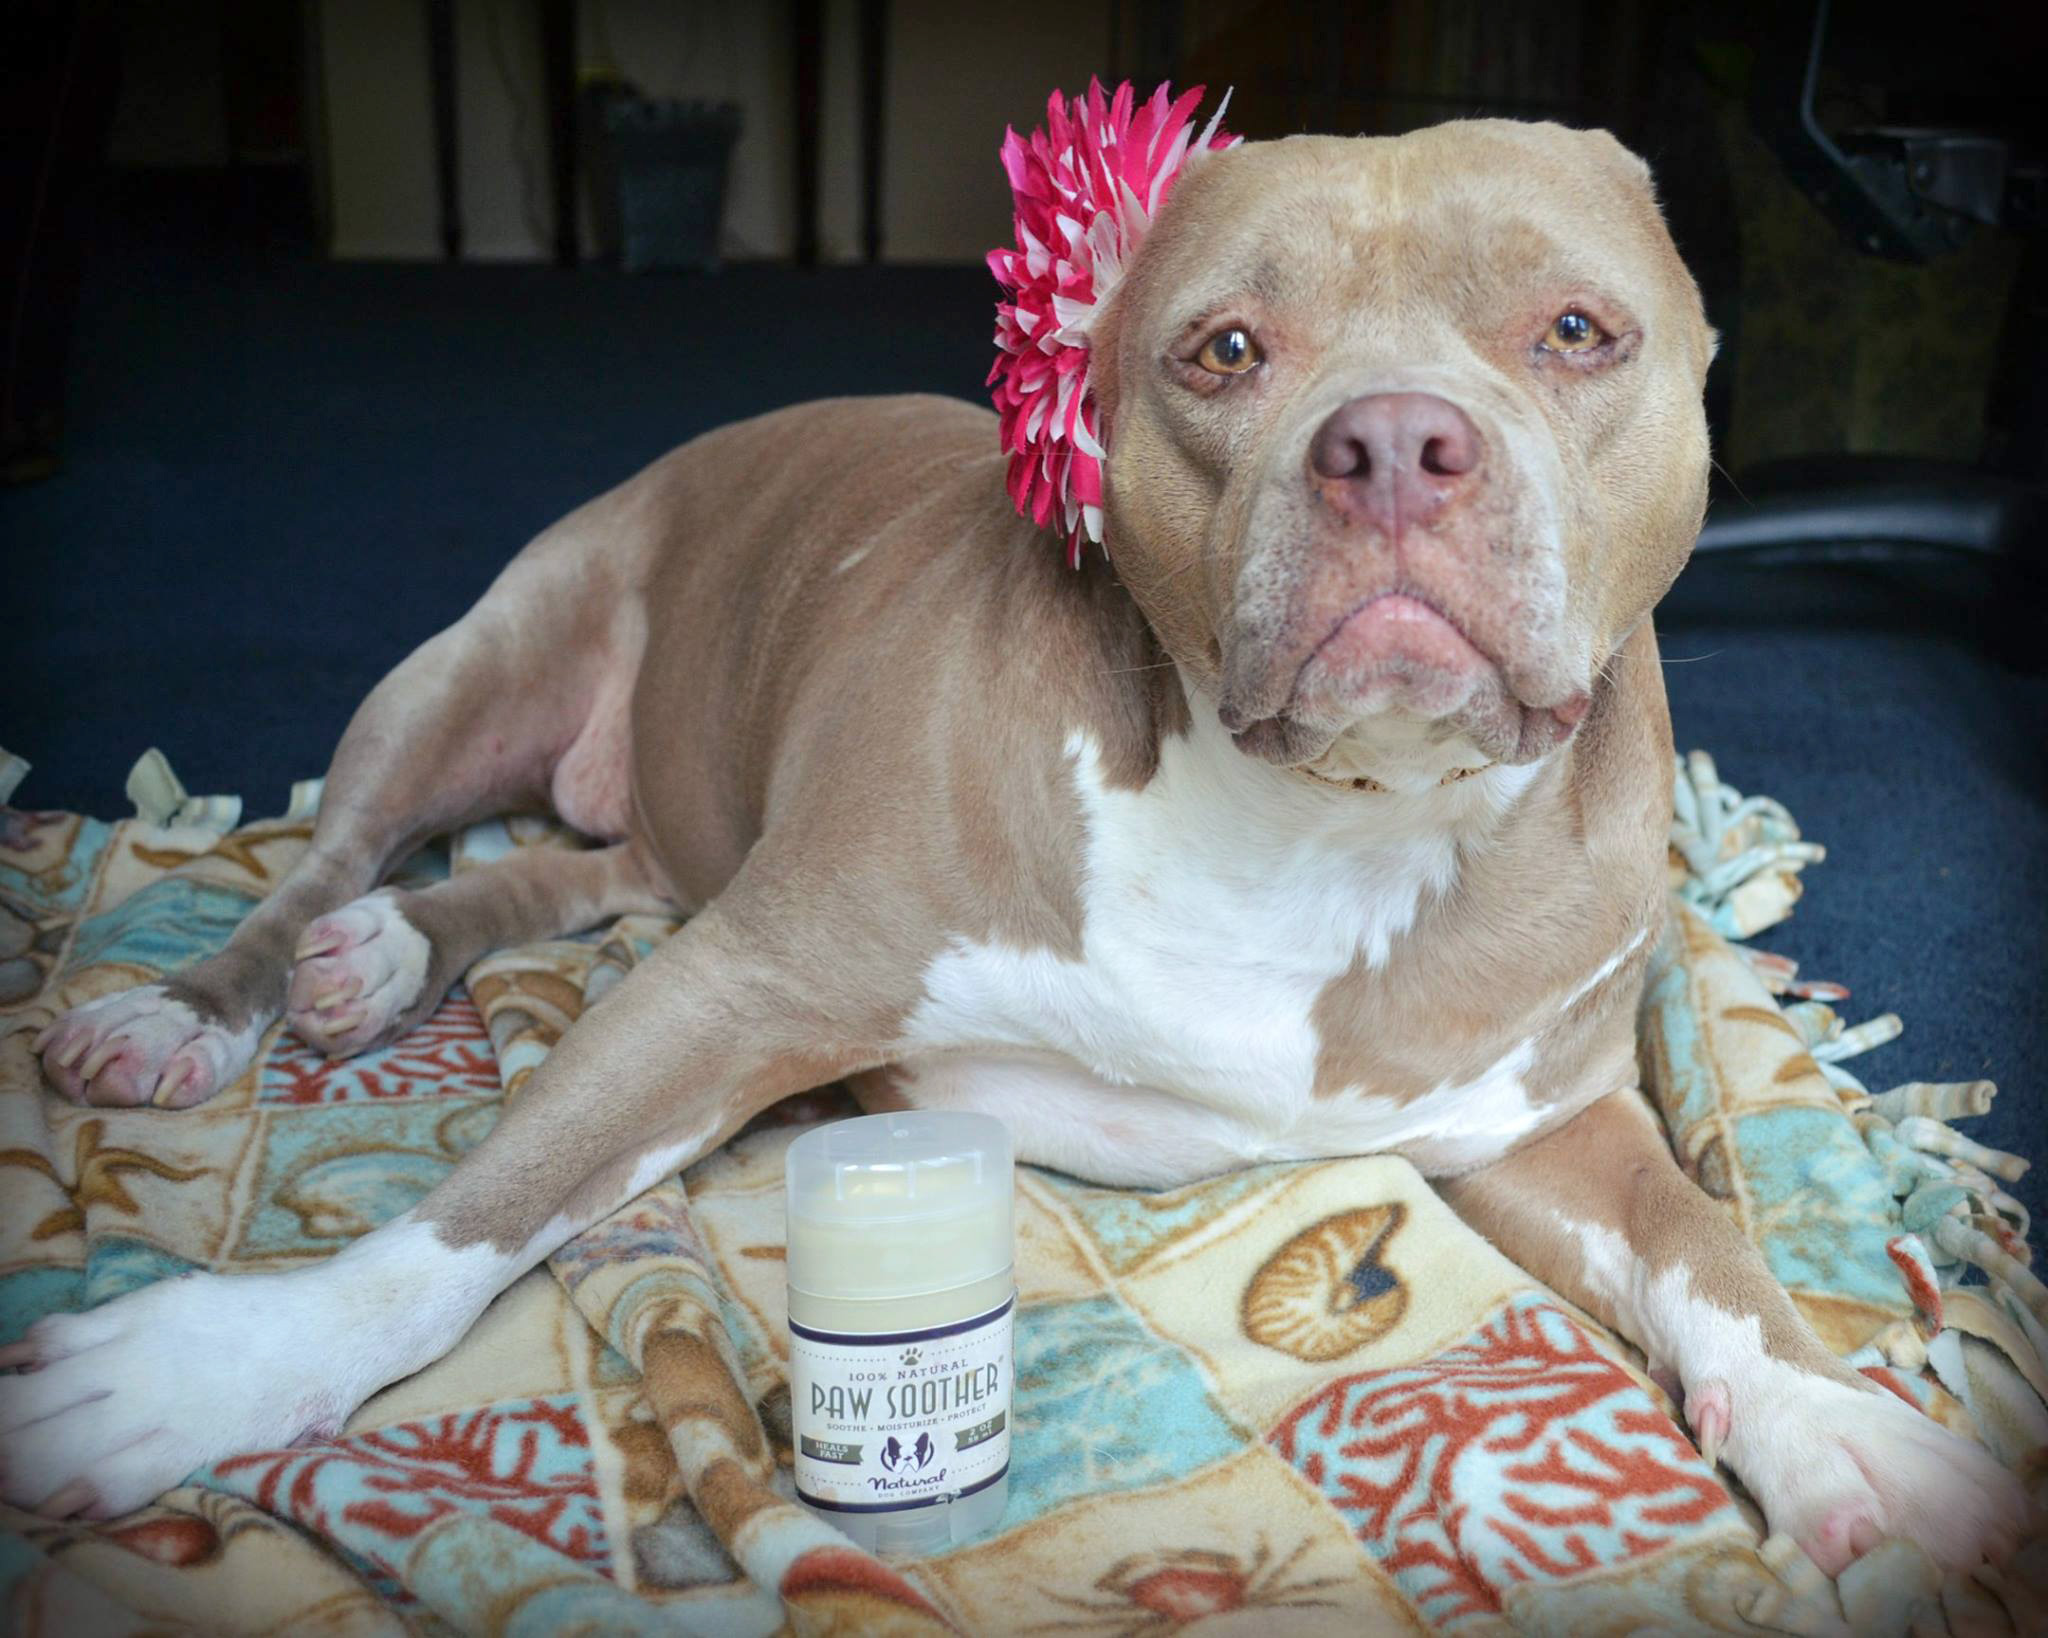 PHOTO: Nana, pictured here, is an earless Pit Bull, who was adopted from a Los Angeles animal shelter by Stephanie Doris, 25, in 2013. 